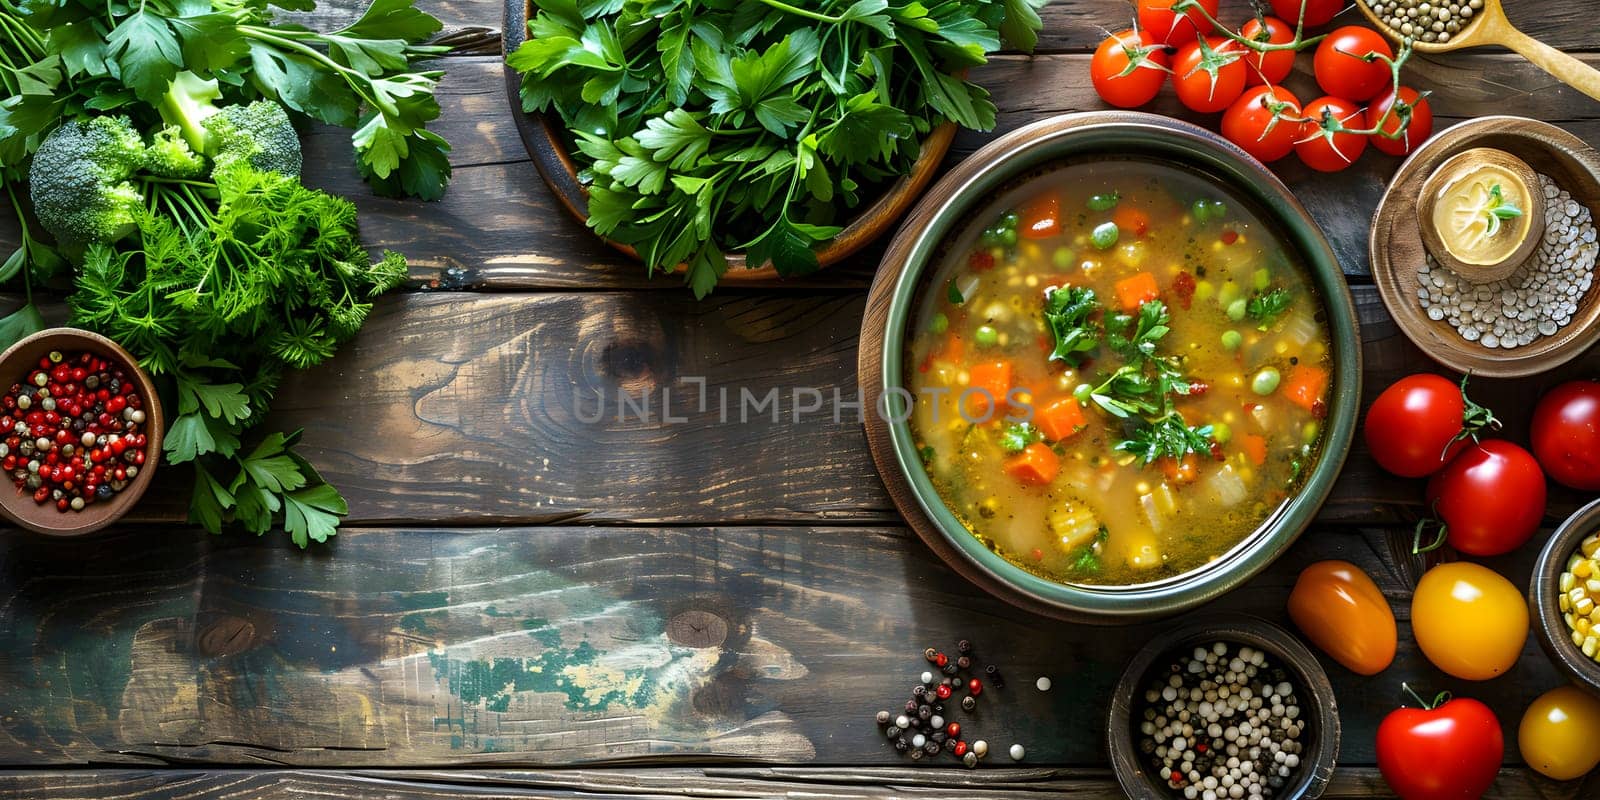 A dish of soup with a variety of vegetables and spices placed on a rustic wooden table, showcasing a colorful display of ingredients and flavors